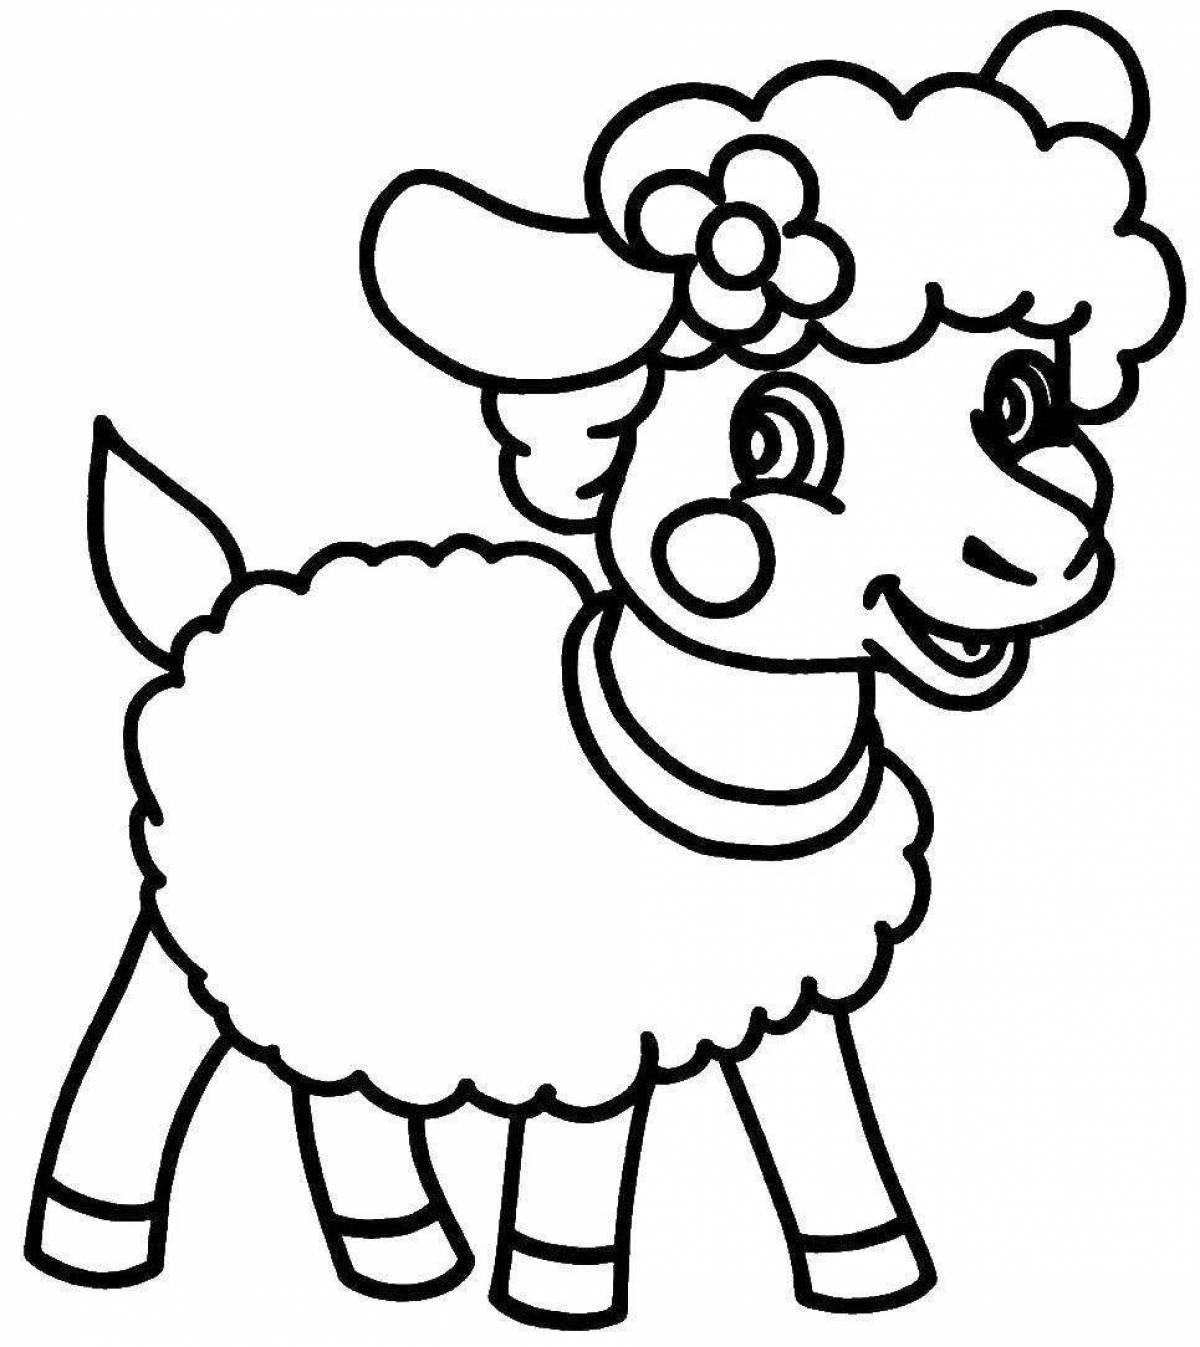 Amazing sheep coloring page for 3-4 year olds